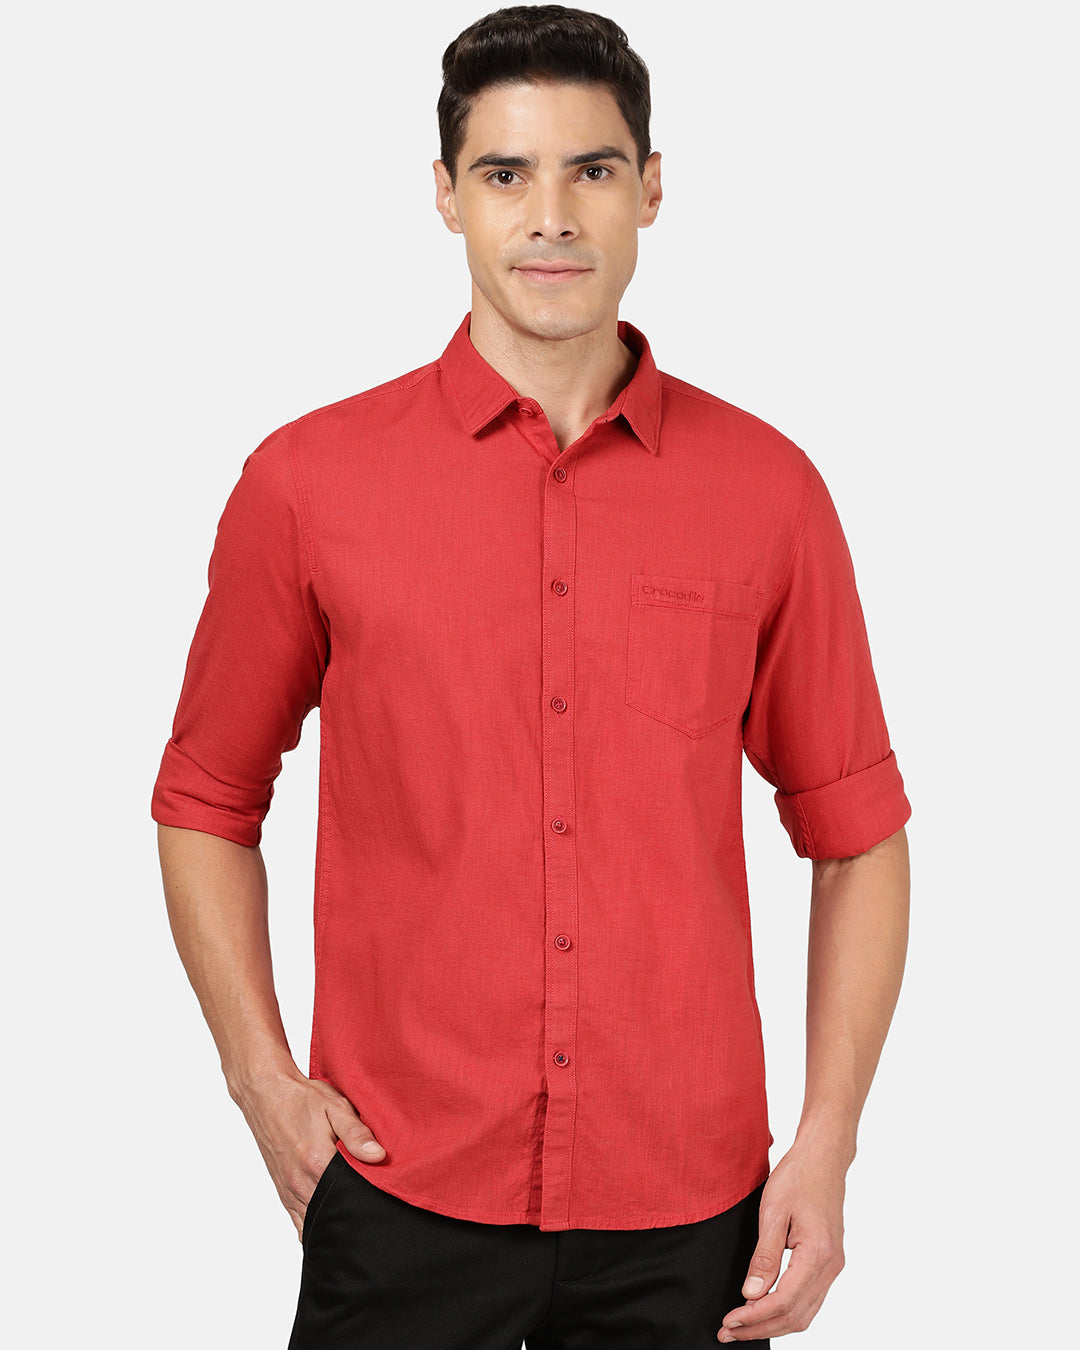 Crocodile Casual Full Sleeve Comfort Fit Solid Red with Collar Shirt for Men